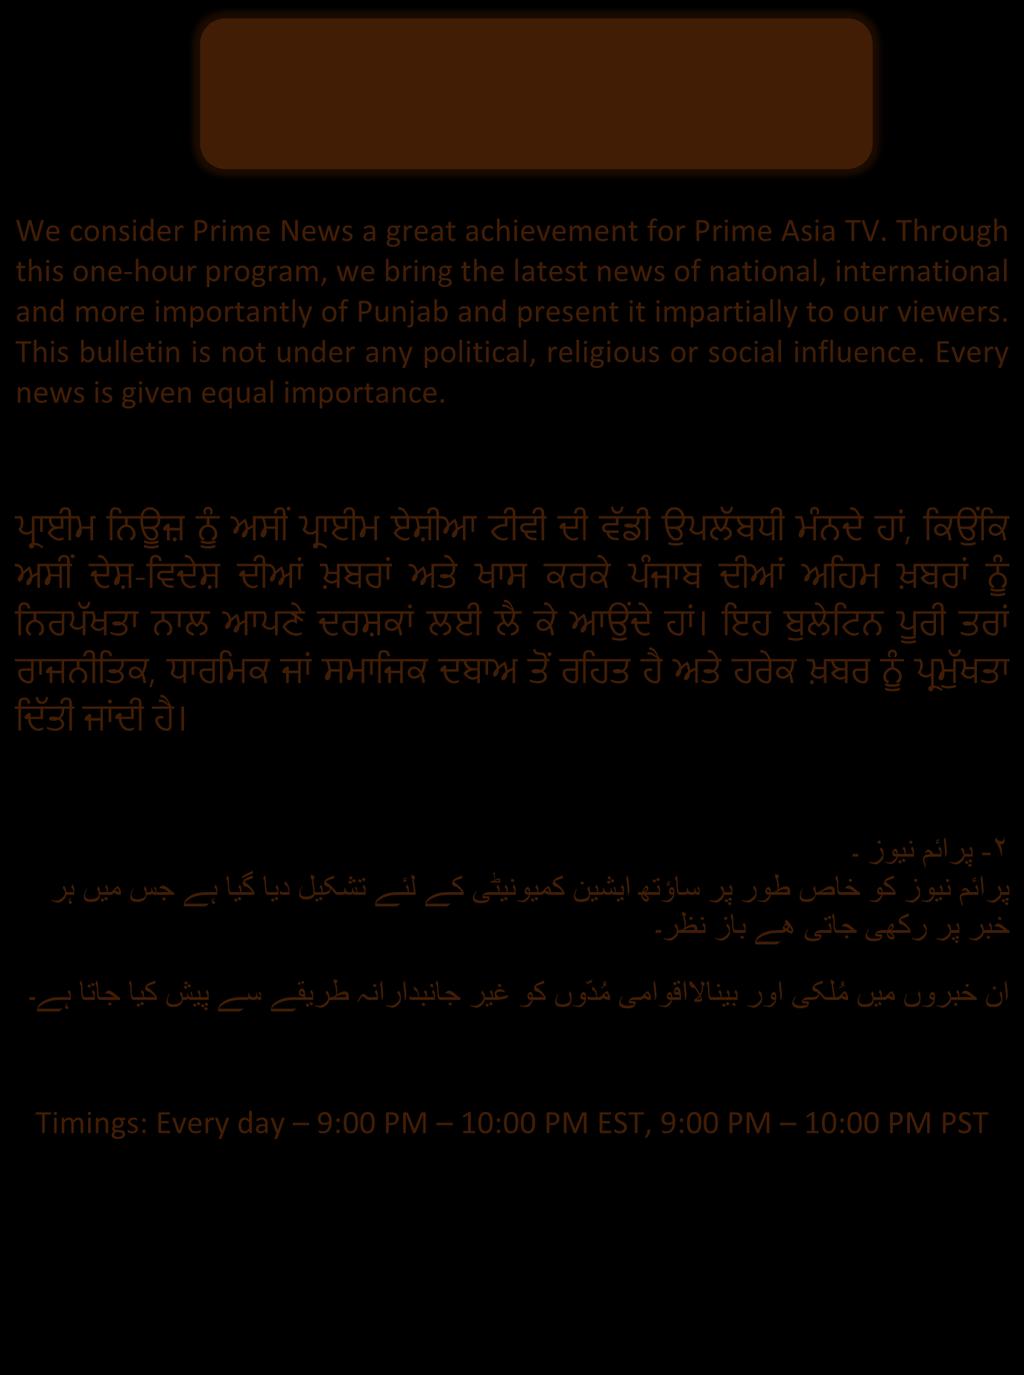 We consider Prime News a great achievement for Prime Asia TV.